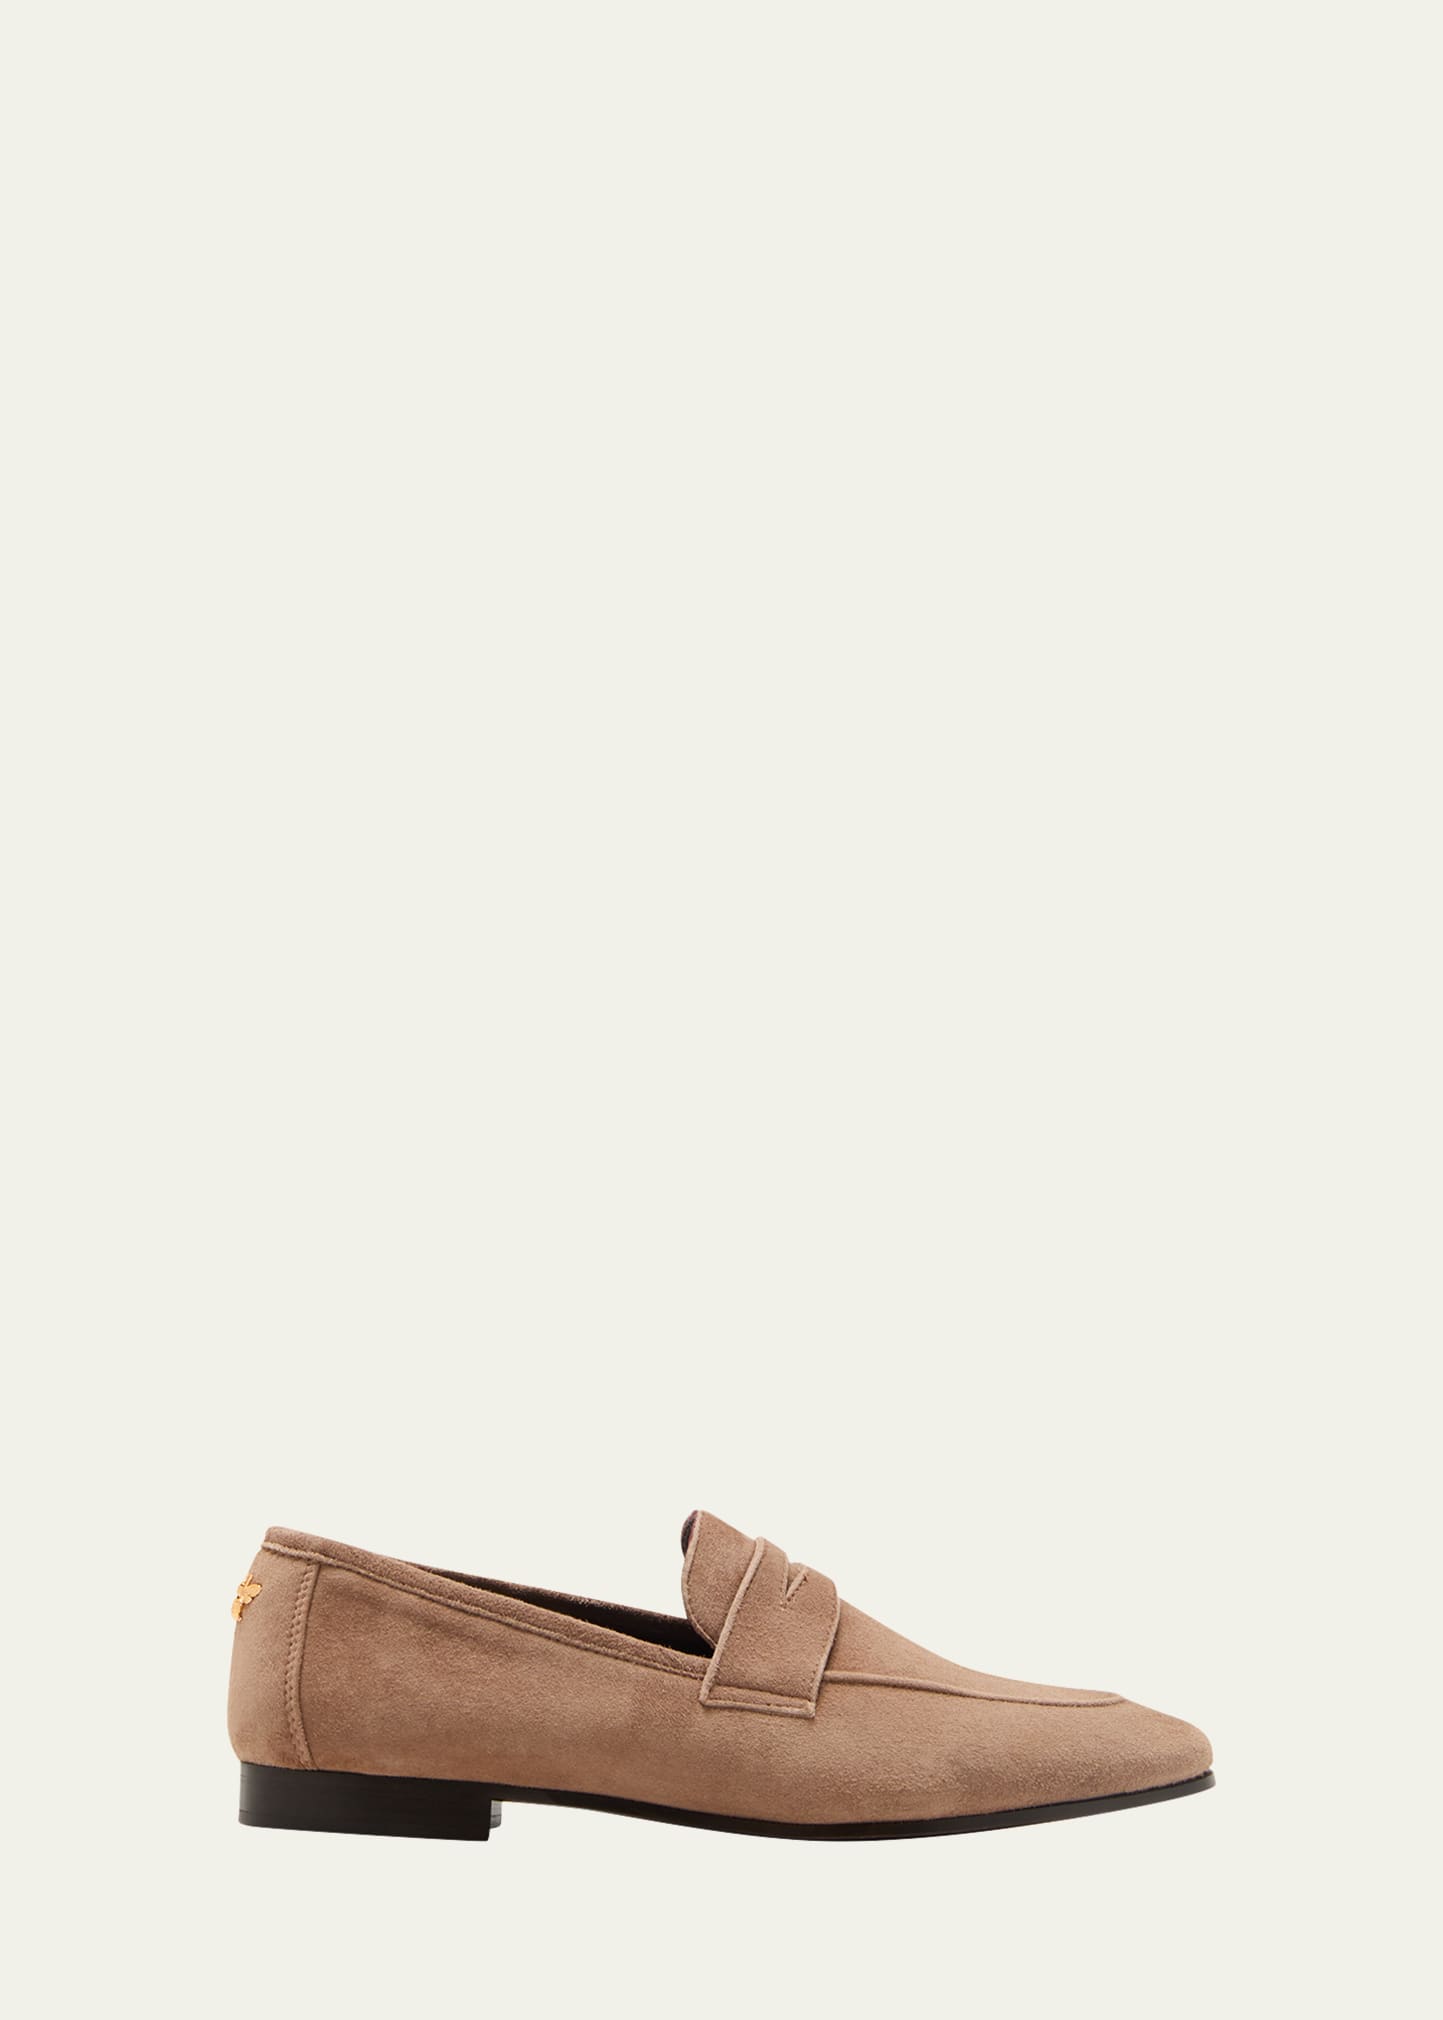 Bougeotte Flaneur Suede Penny Loafers In Baobab